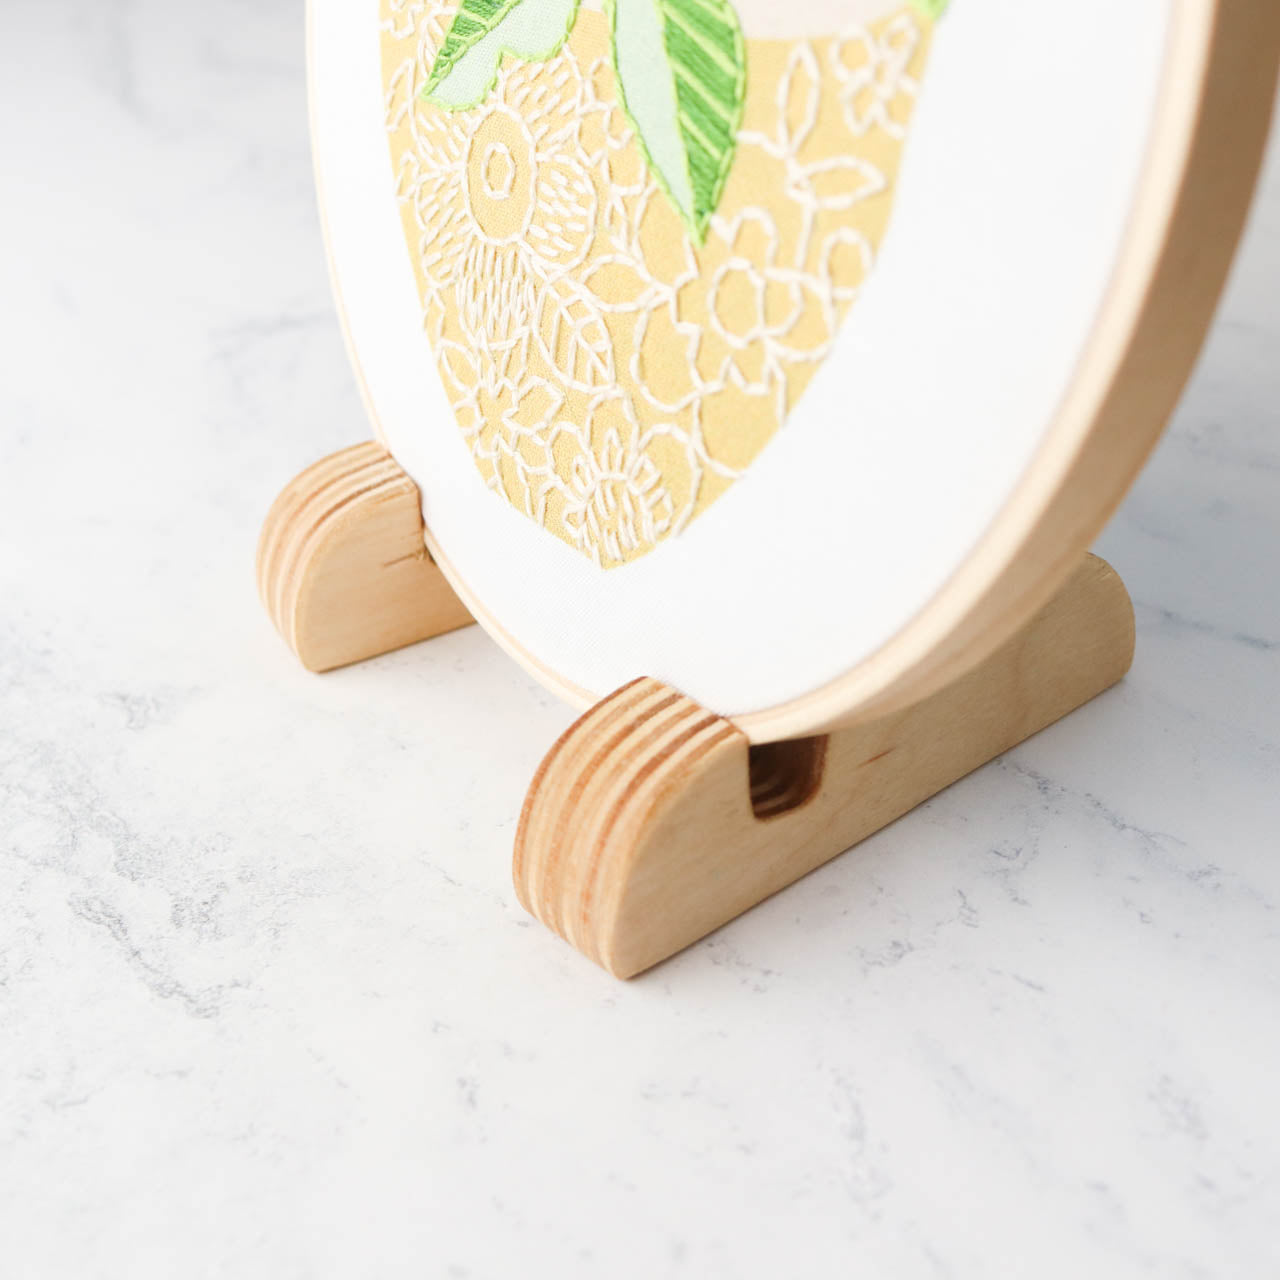 Hoop Feet Embroidery Hoop Stand - Stitched Modern